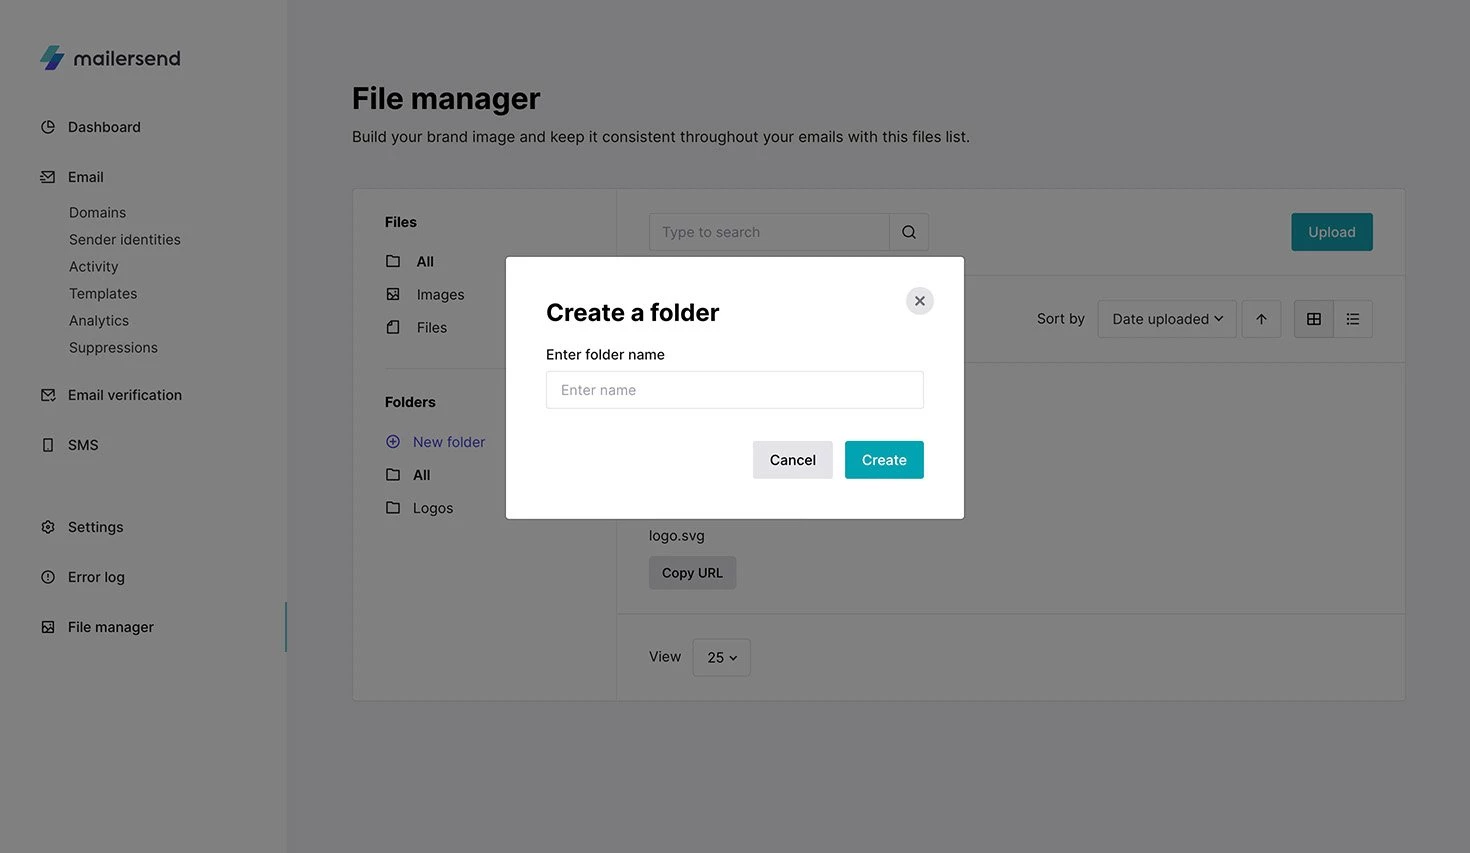 Create a folder window in the file manager.